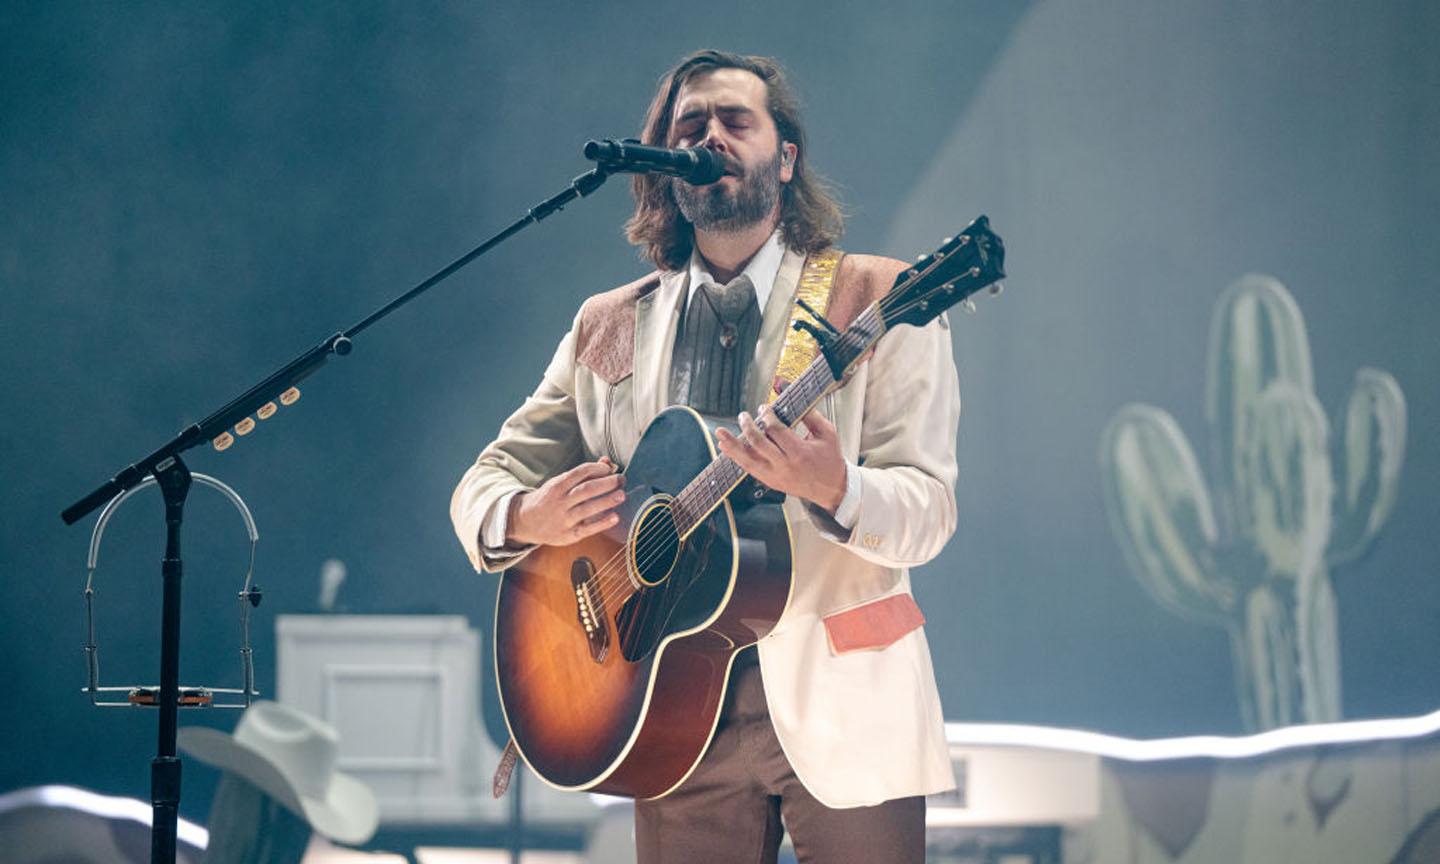 Lord Huron Captivates with Folk Rock Melodies